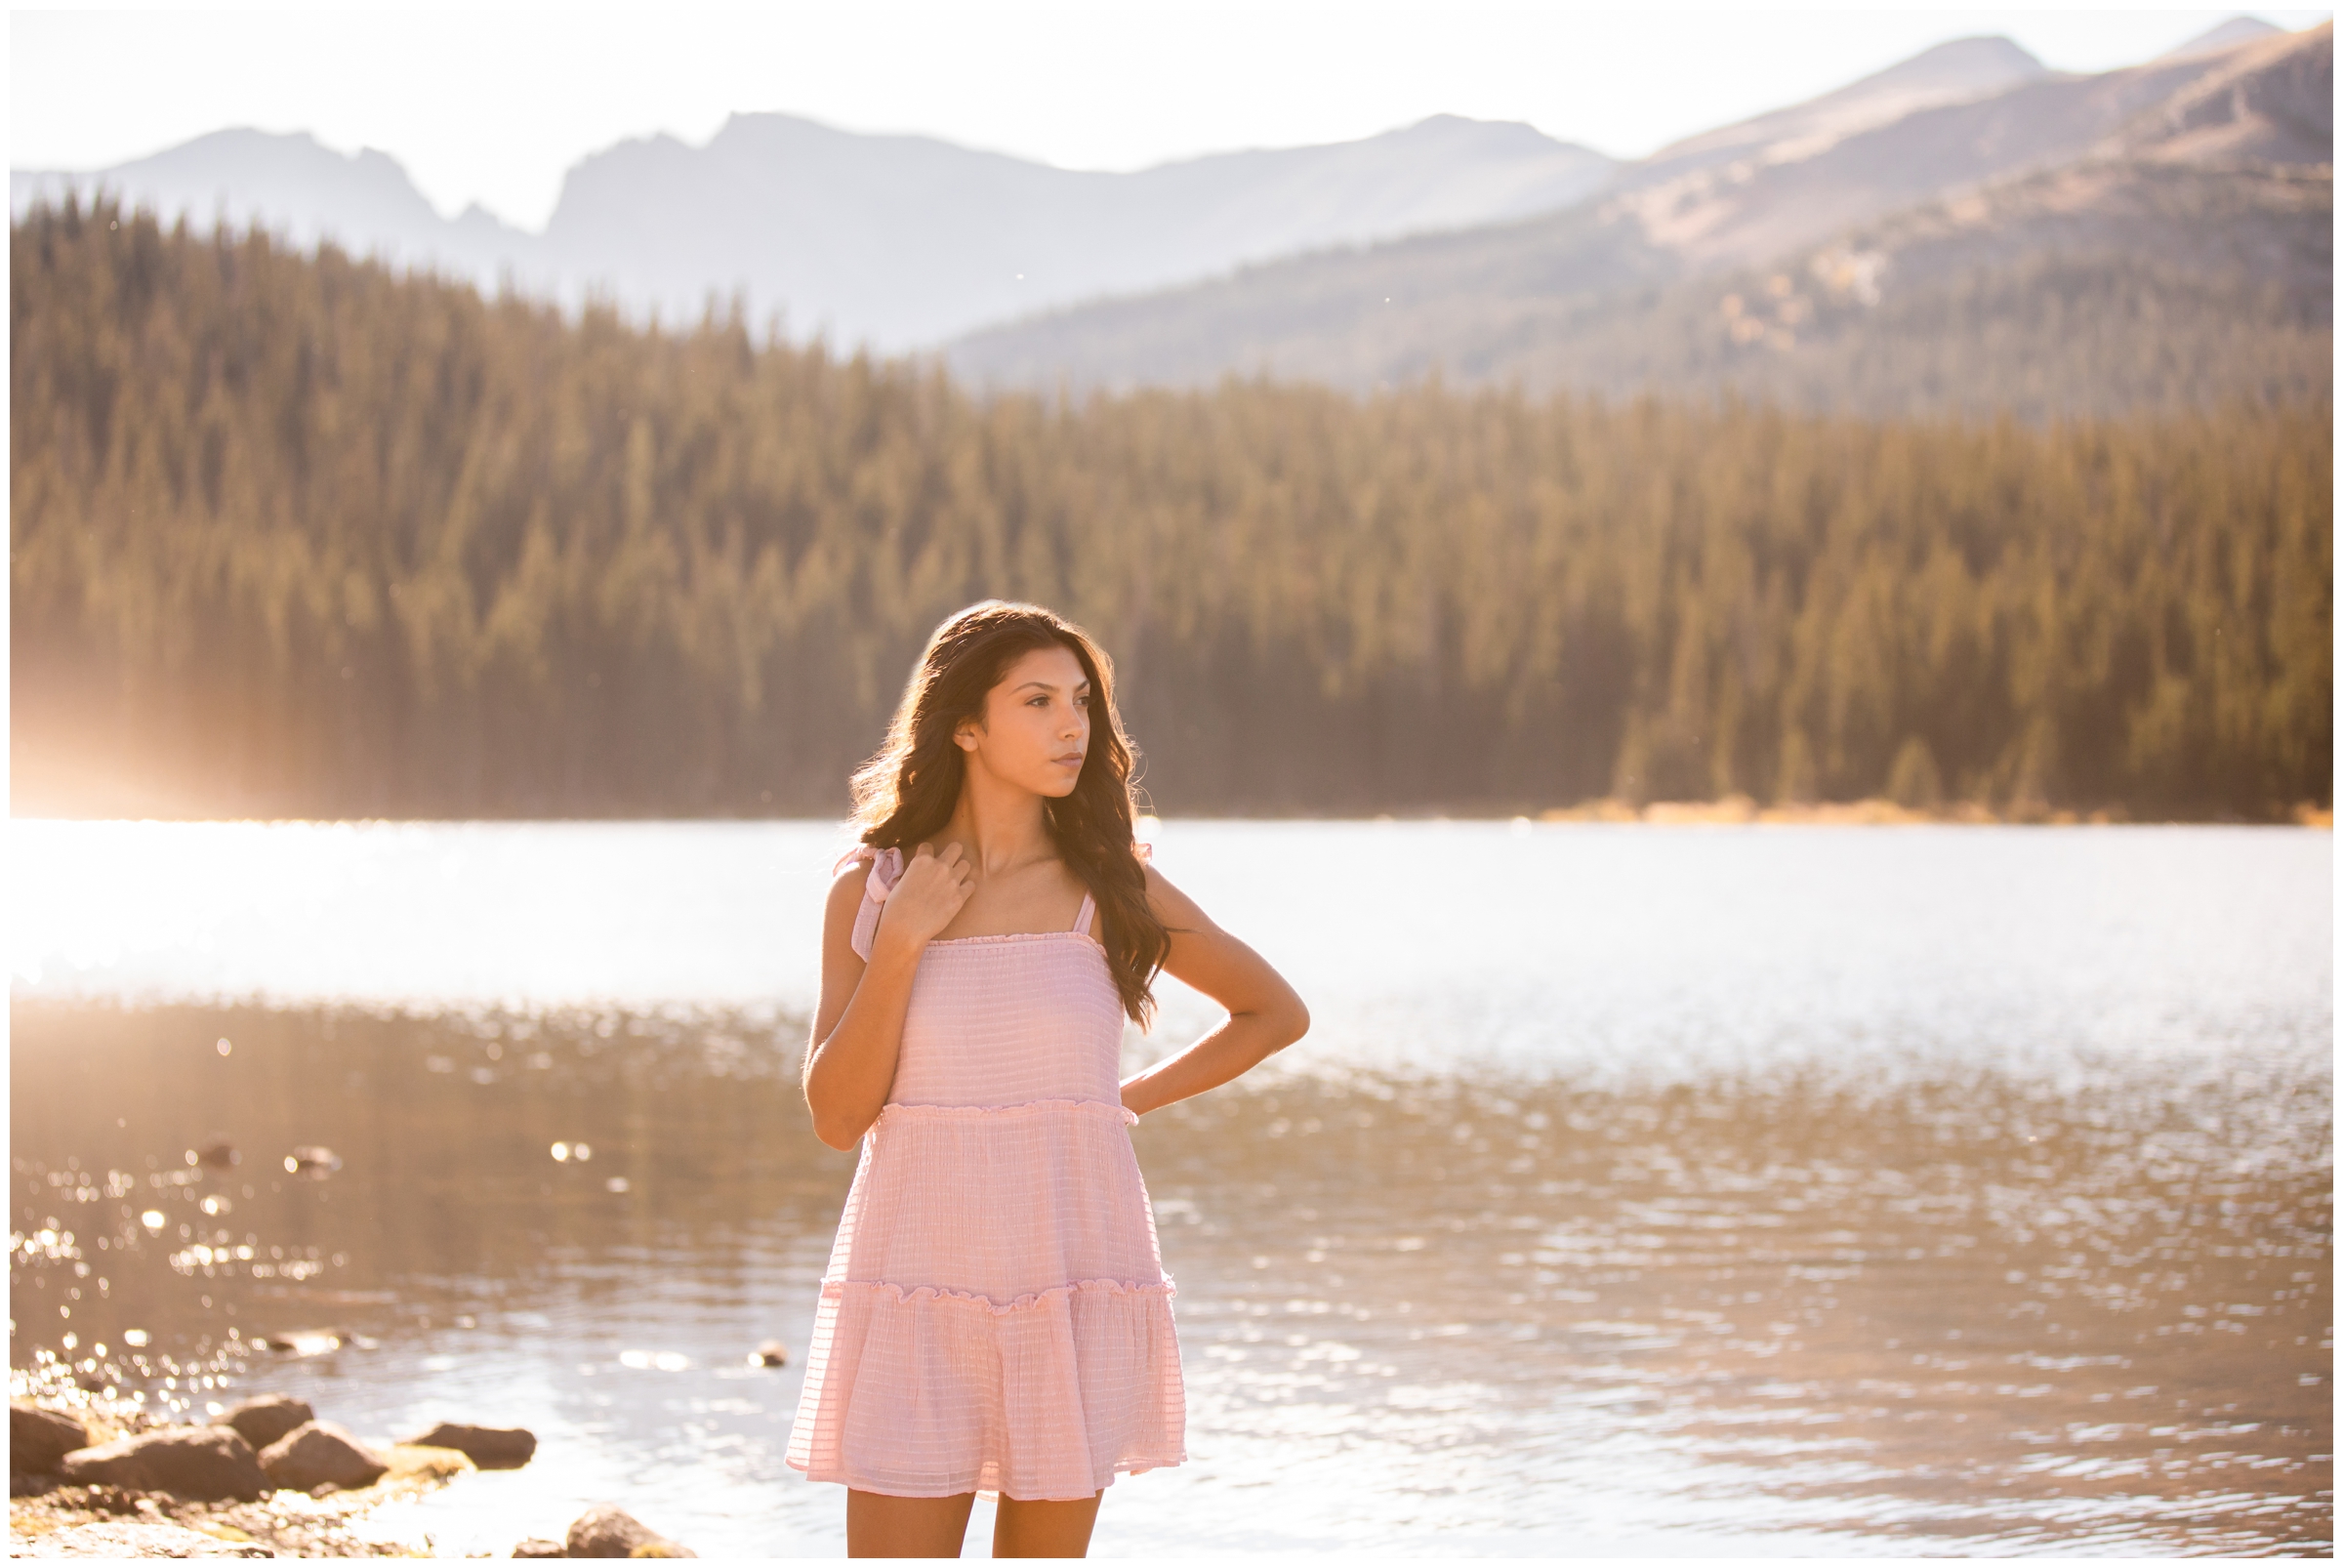 high school grad photography session in the Colorado mountains by Plum Pretty Photography 